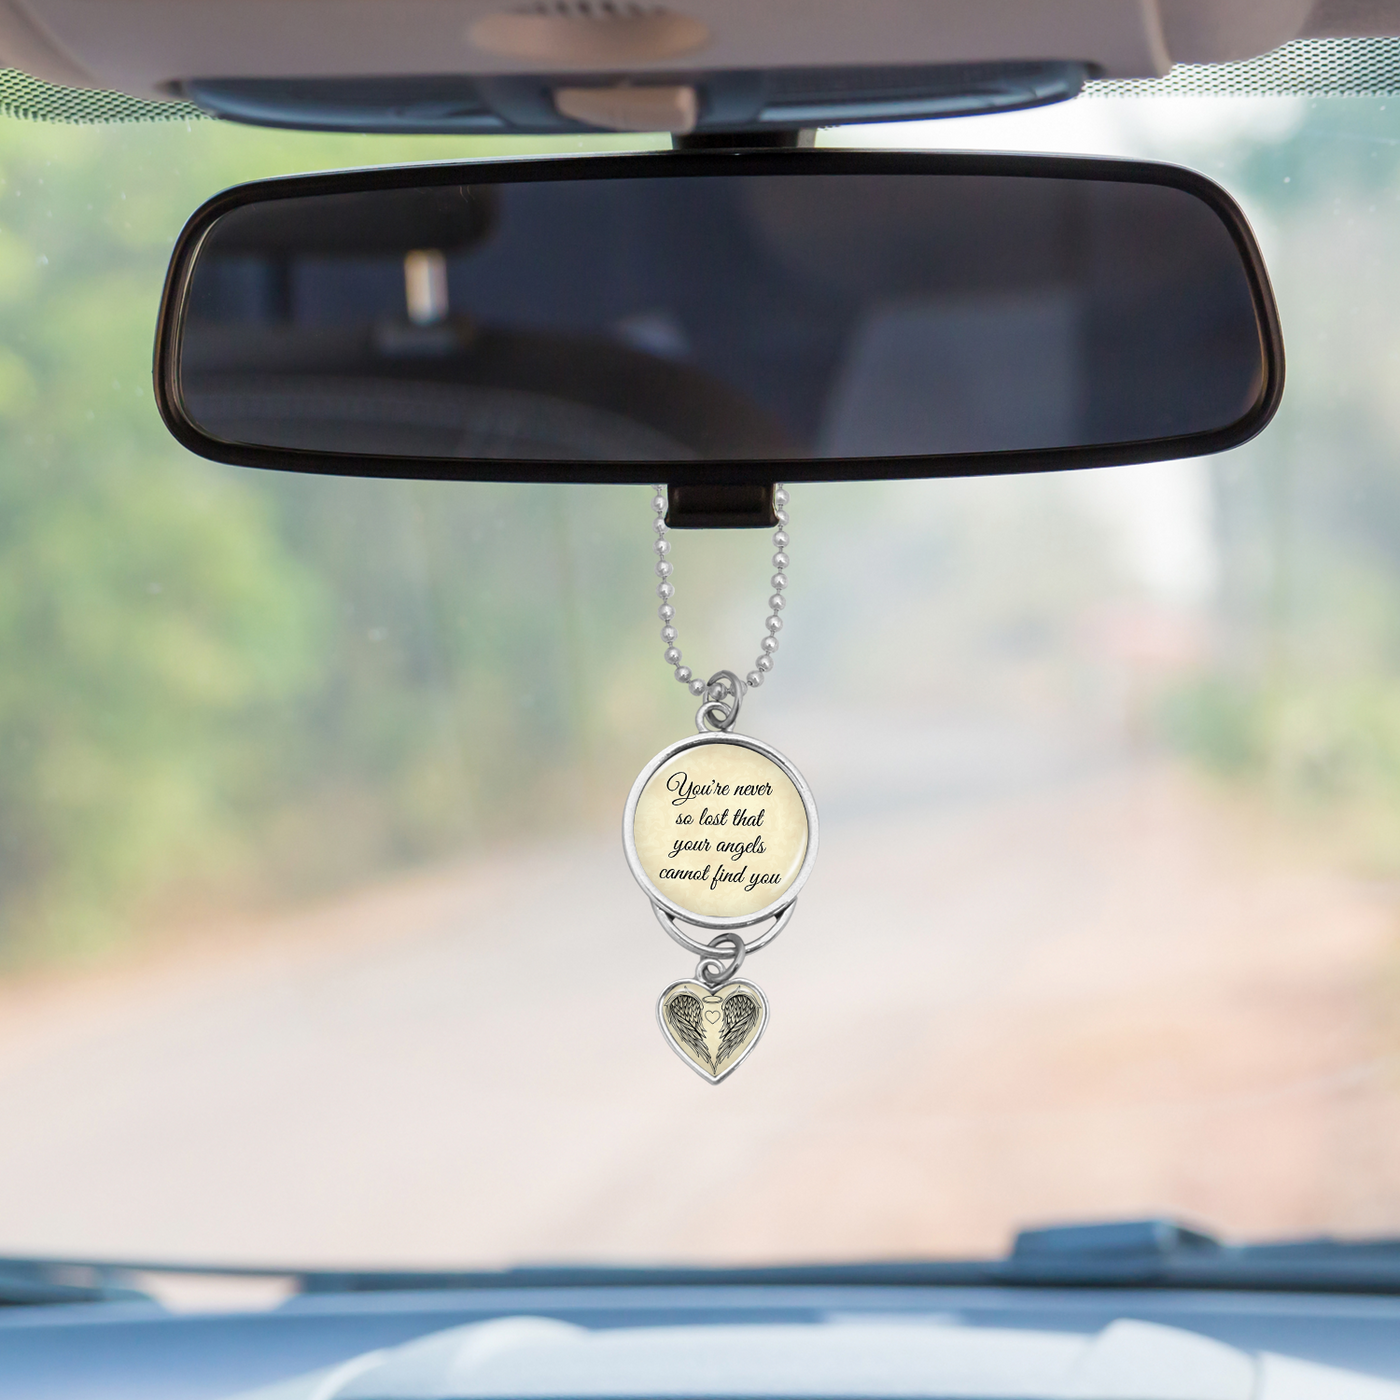 Never So Lost Rearview Mirror Charm